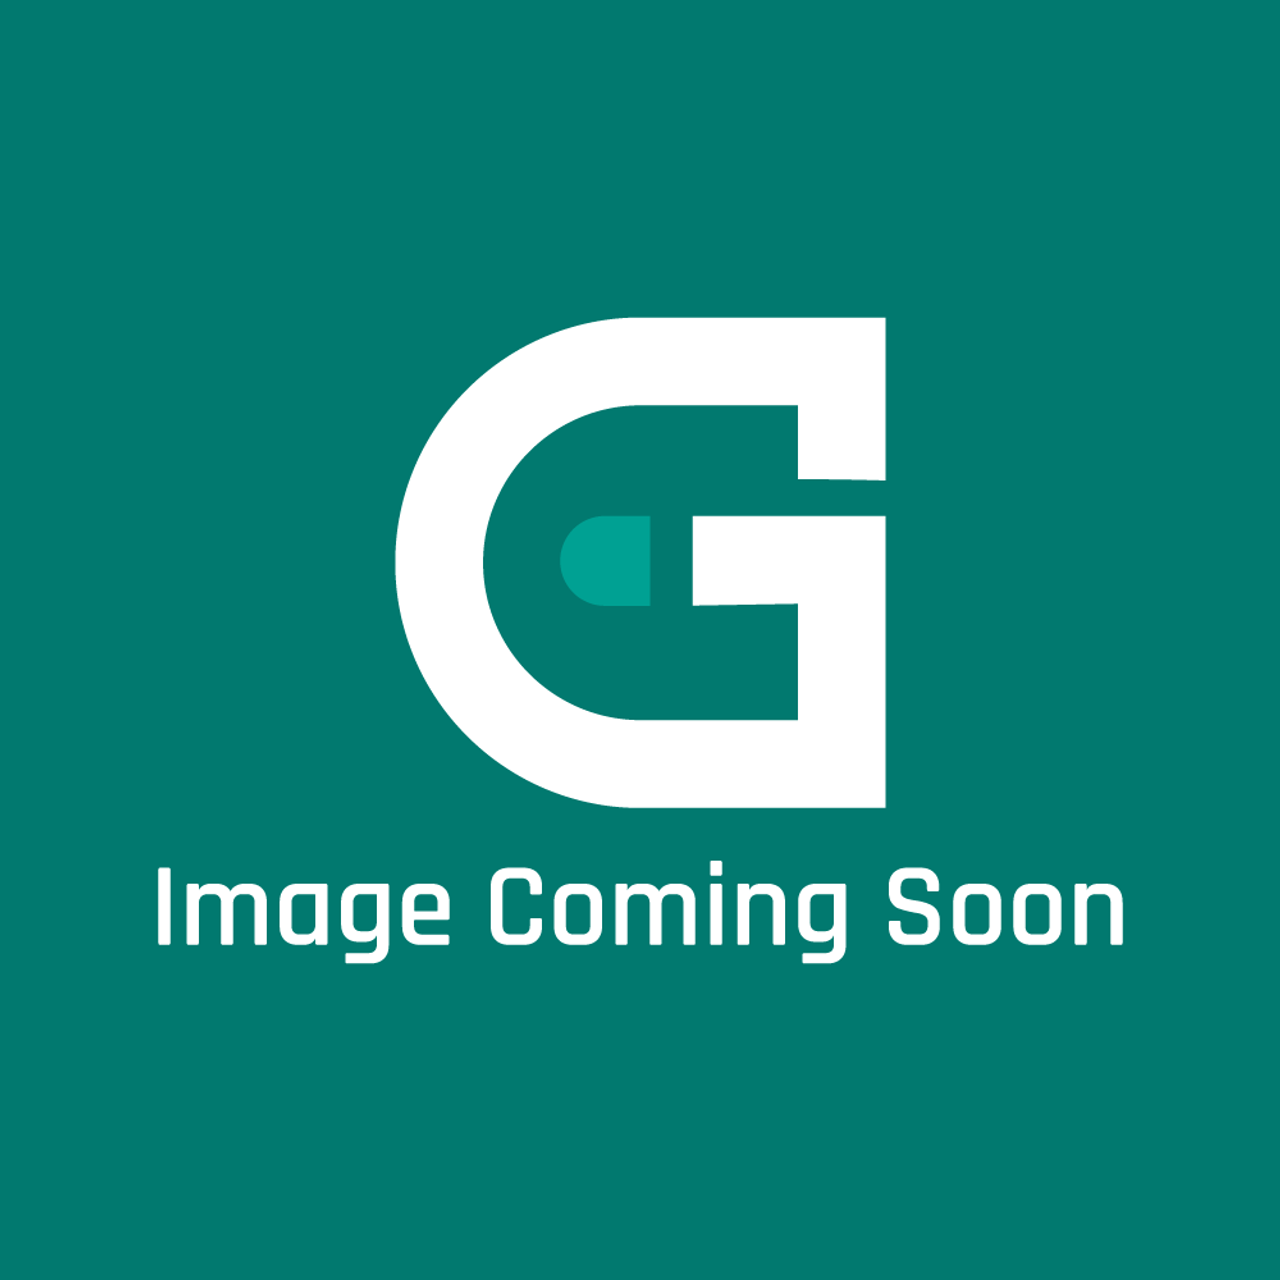 AGA Marvel AG4M212344 - Injector Carrier - Image Coming Soon!